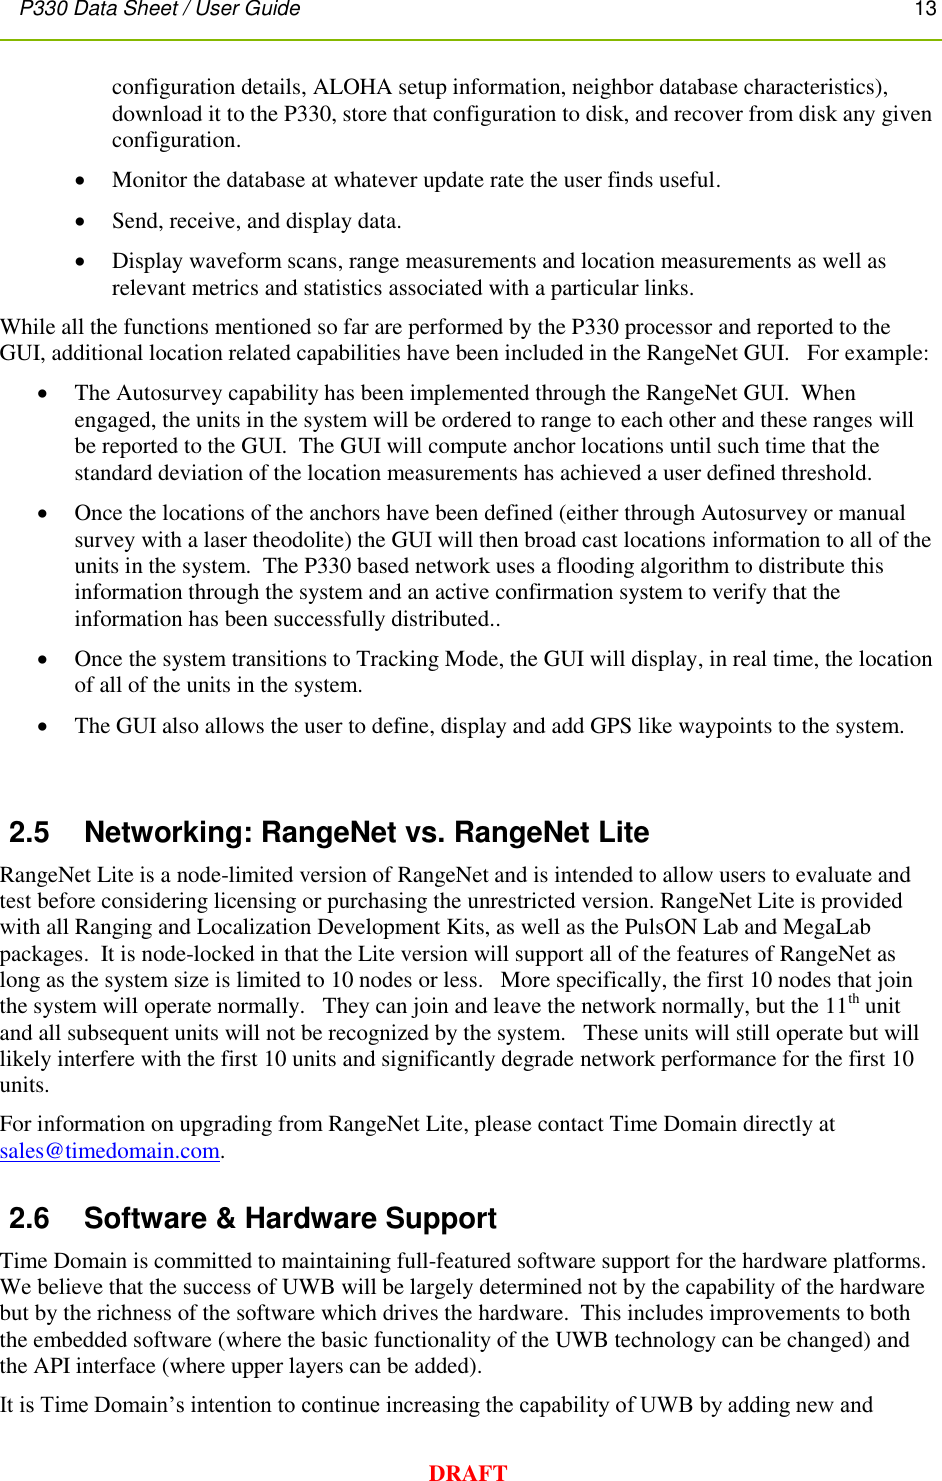 P330 Data Sheet / User Guide       13        DRAFT configuration details, ALOHA setup information, neighbor database characteristics), download it to the P330, store that configuration to disk, and recover from disk any given configuration.  Monitor the database at whatever update rate the user finds useful.    Send, receive, and display data.  Display waveform scans, range measurements and location measurements as well as relevant metrics and statistics associated with a particular links. While all the functions mentioned so far are performed by the P330 processor and reported to the GUI, additional location related capabilities have been included in the RangeNet GUI.   For example:  The Autosurvey capability has been implemented through the RangeNet GUI.  When engaged, the units in the system will be ordered to range to each other and these ranges will be reported to the GUI.  The GUI will compute anchor locations until such time that the standard deviation of the location measurements has achieved a user defined threshold.  Once the locations of the anchors have been defined (either through Autosurvey or manual survey with a laser theodolite) the GUI will then broad cast locations information to all of the units in the system.  The P330 based network uses a flooding algorithm to distribute this information through the system and an active confirmation system to verify that the information has been successfully distributed..  Once the system transitions to Tracking Mode, the GUI will display, in real time, the location of all of the units in the system.    The GUI also allows the user to define, display and add GPS like waypoints to the system.  2.5  Networking: RangeNet vs. RangeNet Lite RangeNet Lite is a node-limited version of RangeNet and is intended to allow users to evaluate and test before considering licensing or purchasing the unrestricted version. RangeNet Lite is provided with all Ranging and Localization Development Kits, as well as the PulsON Lab and MegaLab packages.  It is node-locked in that the Lite version will support all of the features of RangeNet as long as the system size is limited to 10 nodes or less.   More specifically, the first 10 nodes that join the system will operate normally.   They can join and leave the network normally, but the 11th unit and all subsequent units will not be recognized by the system.   These units will still operate but will likely interfere with the first 10 units and significantly degrade network performance for the first 10 units. For information on upgrading from RangeNet Lite, please contact Time Domain directly at sales@timedomain.com. 2.6  Software &amp; Hardware Support Time Domain is committed to maintaining full-featured software support for the hardware platforms.  We believe that the success of UWB will be largely determined not by the capability of the hardware but by the richness of the software which drives the hardware.  This includes improvements to both the embedded software (where the basic functionality of the UWB technology can be changed) and the API interface (where upper layers can be added). It is Time Domain’s intention to continue increasing the capability of UWB by adding new and 